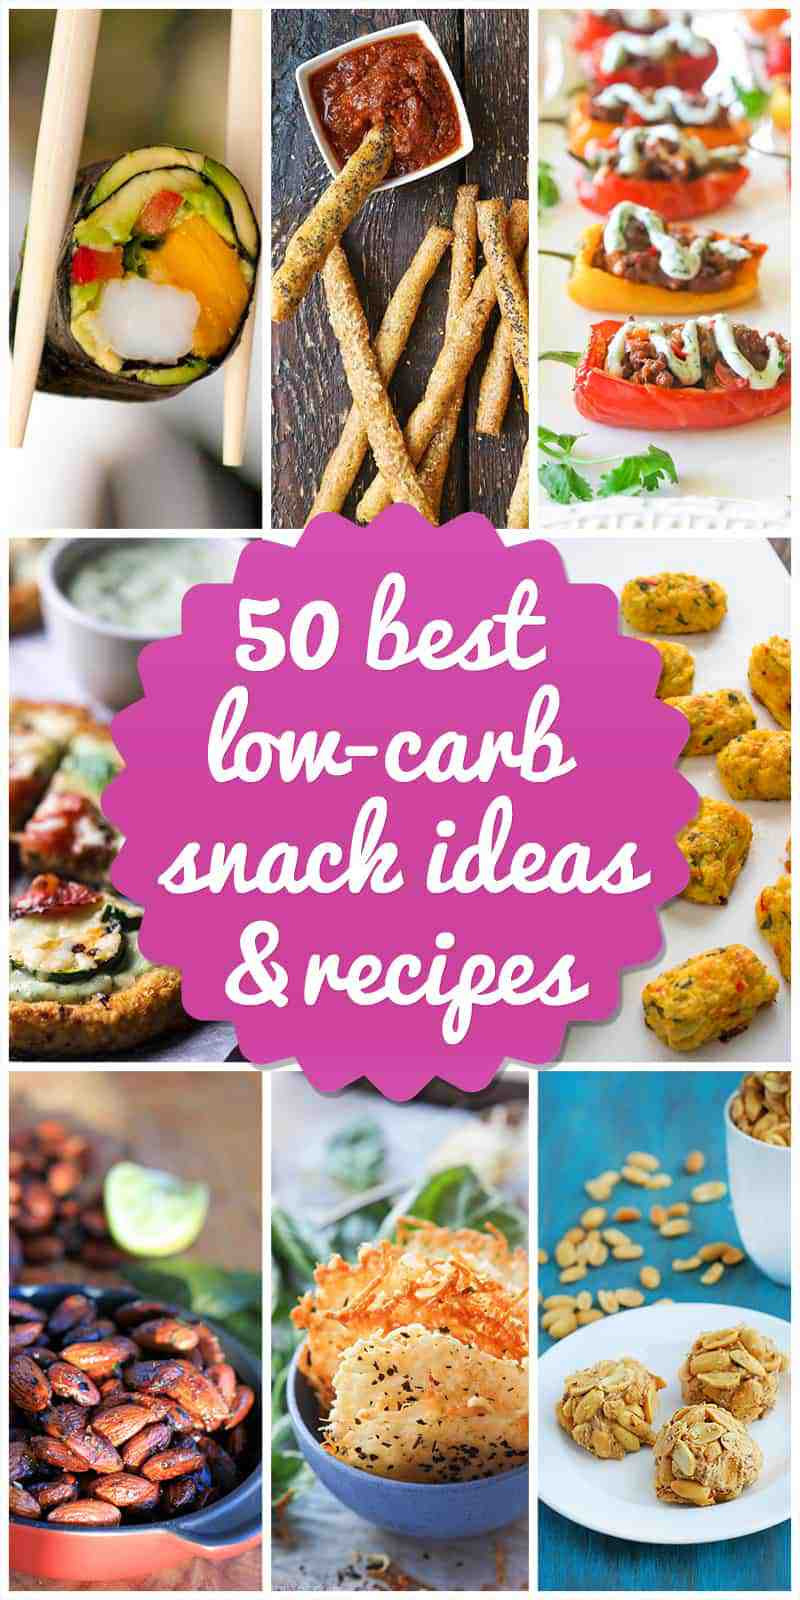 Low Carbohydrate Diet Snacks Ideas
 50 Low Carb Snack Ideas and Recipes for 2018